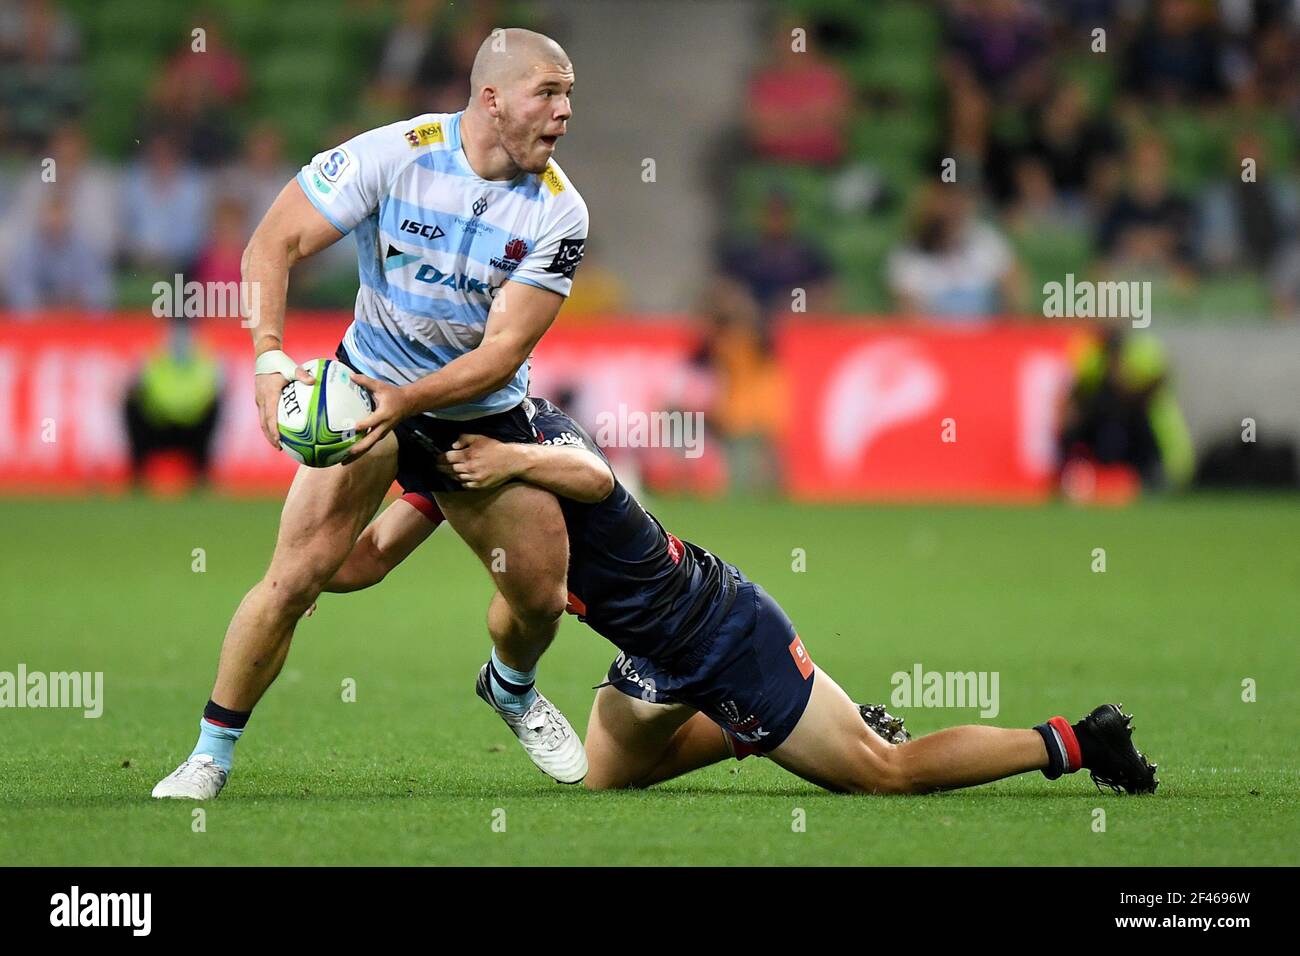 19th March 2021; Melbourne Rectangular Stadium, Melbourne, Victoria, Australia; Australian Super Rugby, Melbourne Rebels versus New South Wales Waratahs; Joe Powell of the Rebels tackles Carlo Tizzano of the Waratahs Stock Photo